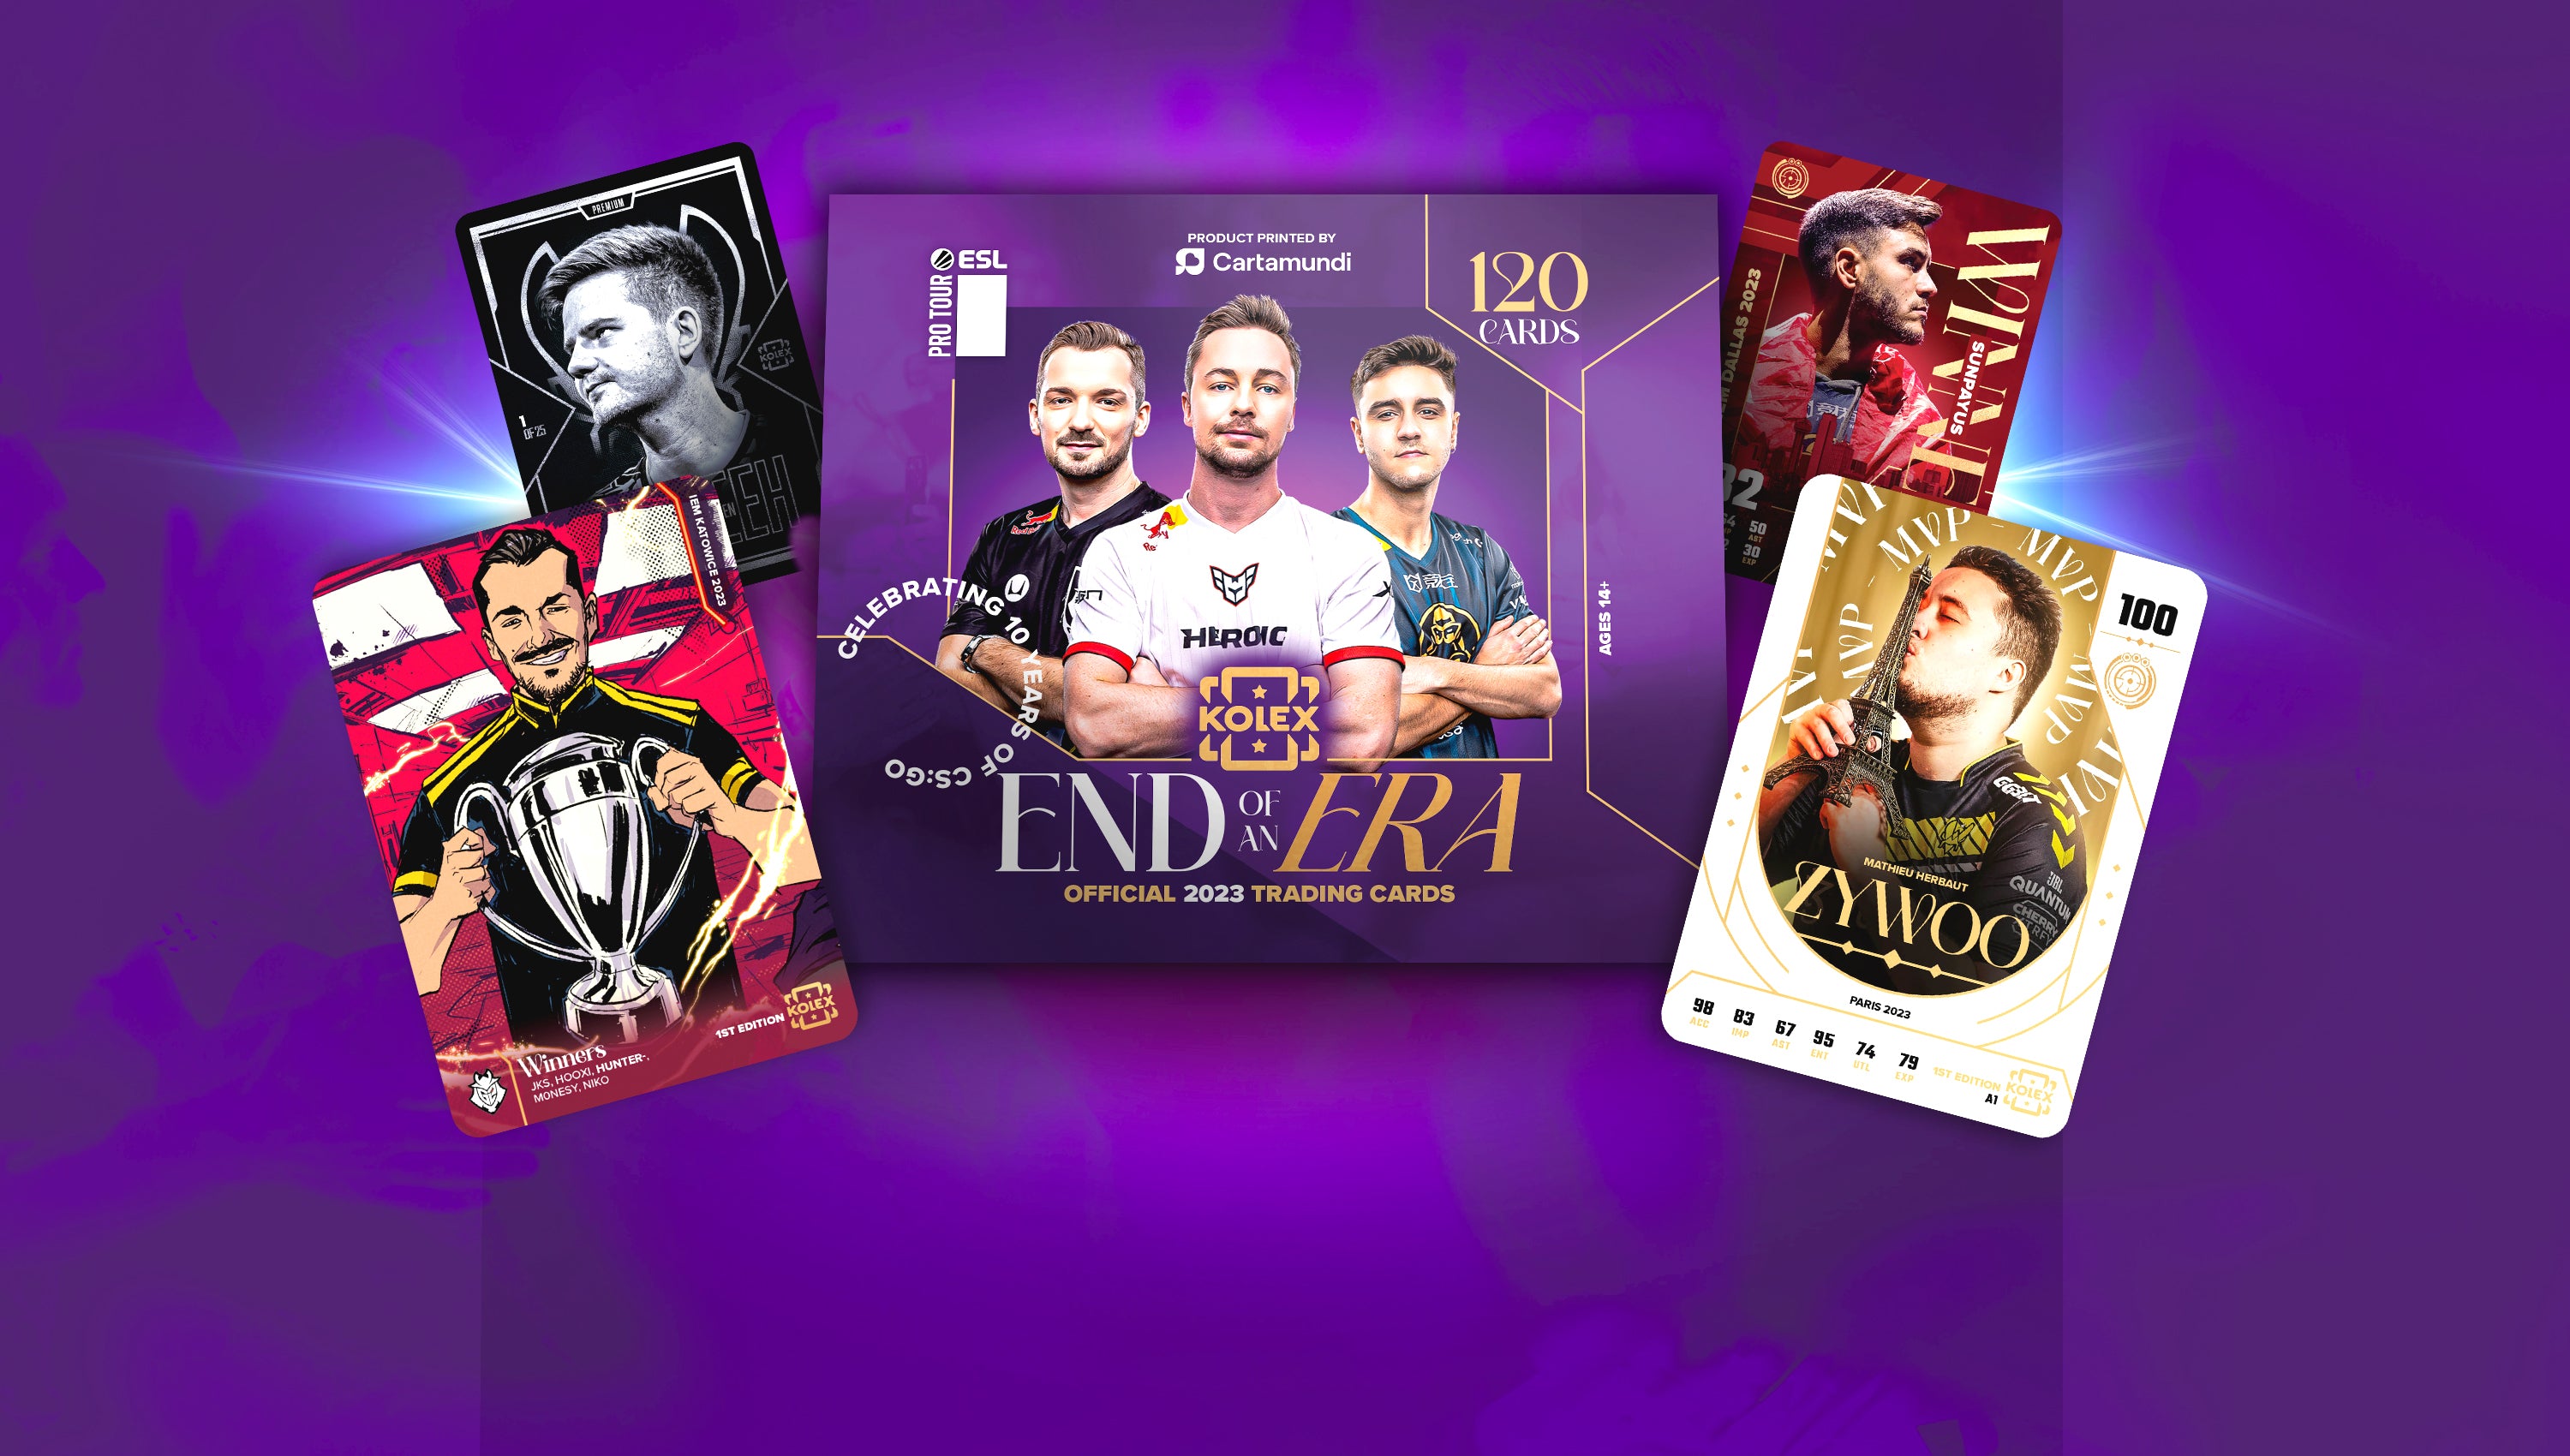 The Kings League, Kolex and Cartamundi partner to launch hybrid trading  cards and fantasy football app for fans, by Kolex Digital Collectibles